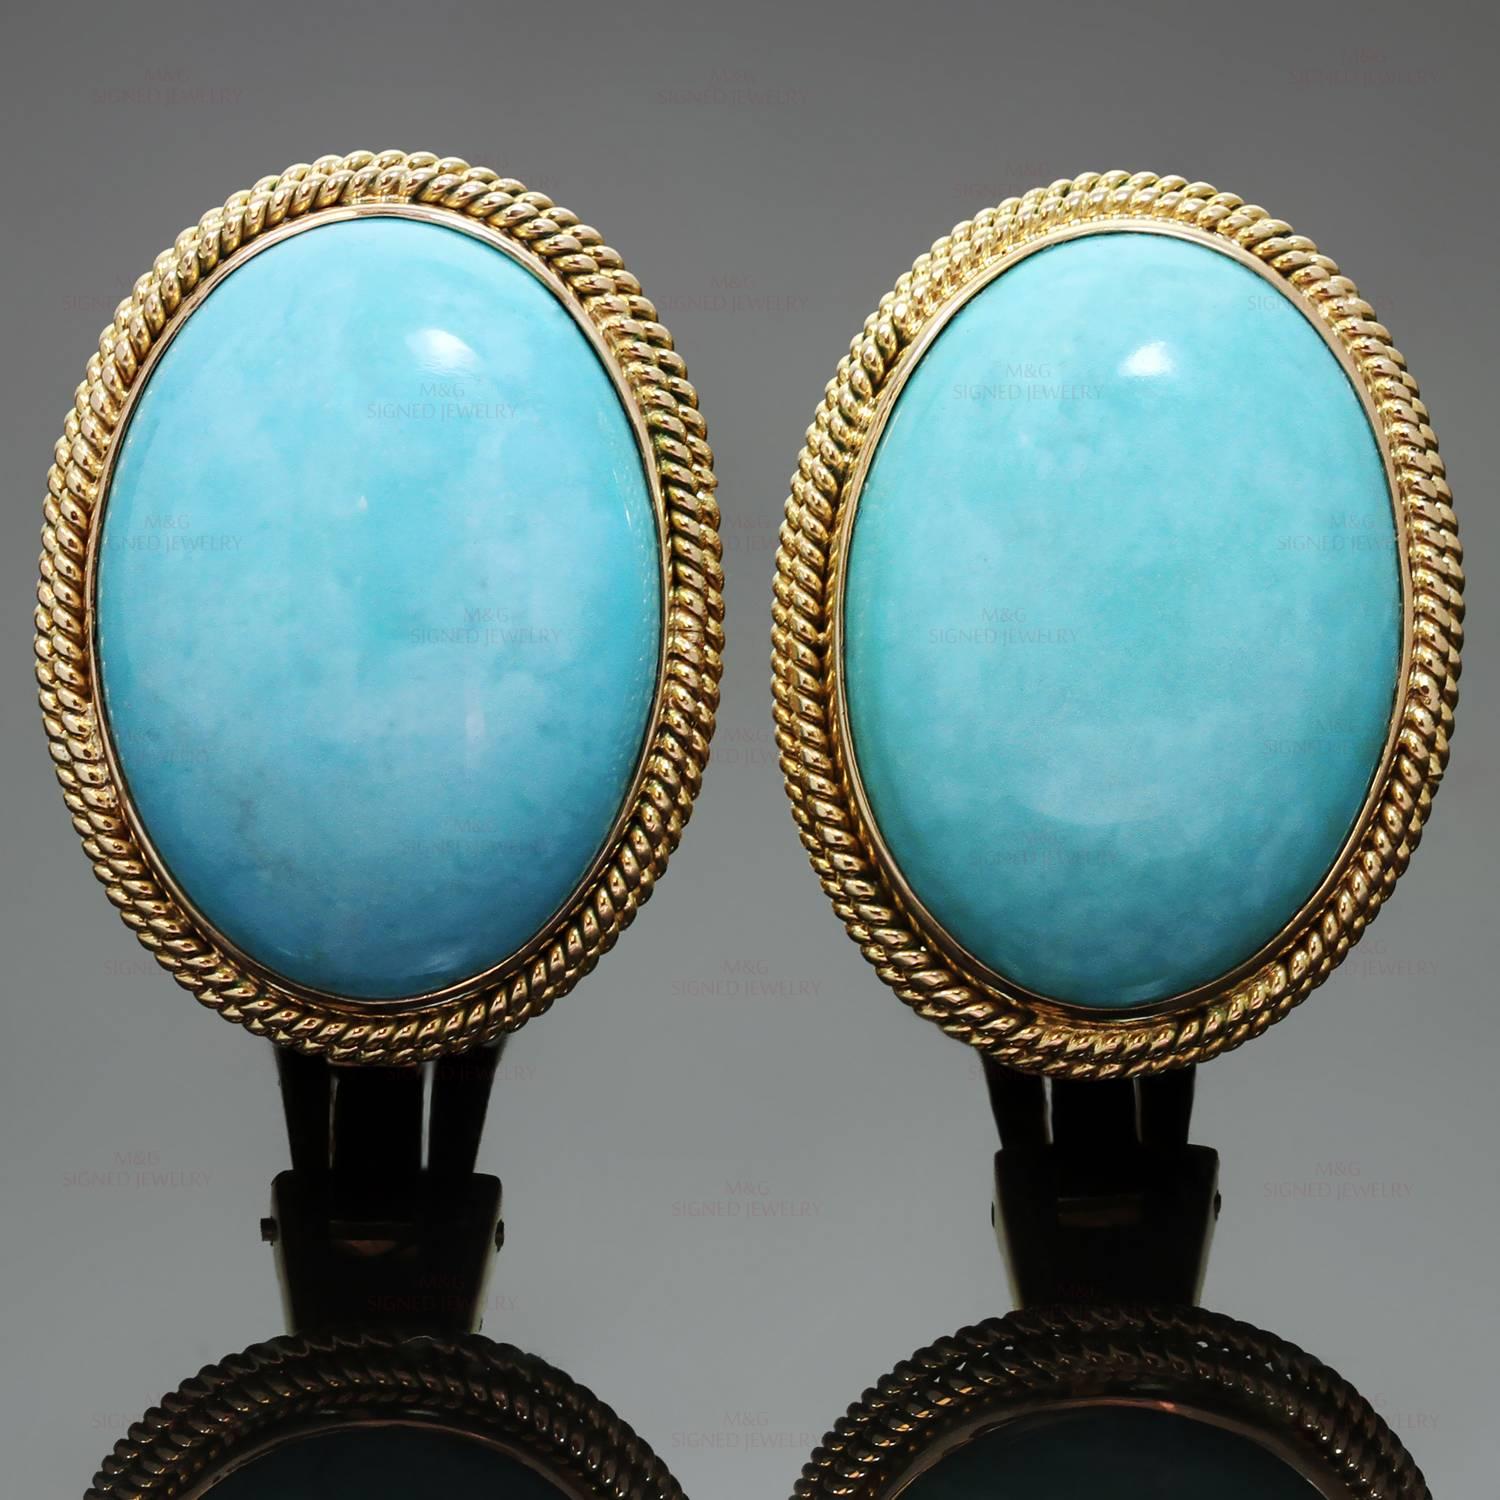 These elegant retro clip-on earrings are crafted in 14k yellow gold and set with genuine Arizona turquoise stones. The oval stones measure an estimated 17.2mm by 24.0mm. Made in United States circa 1960s. Measurements: 0.86" (22mm) width,